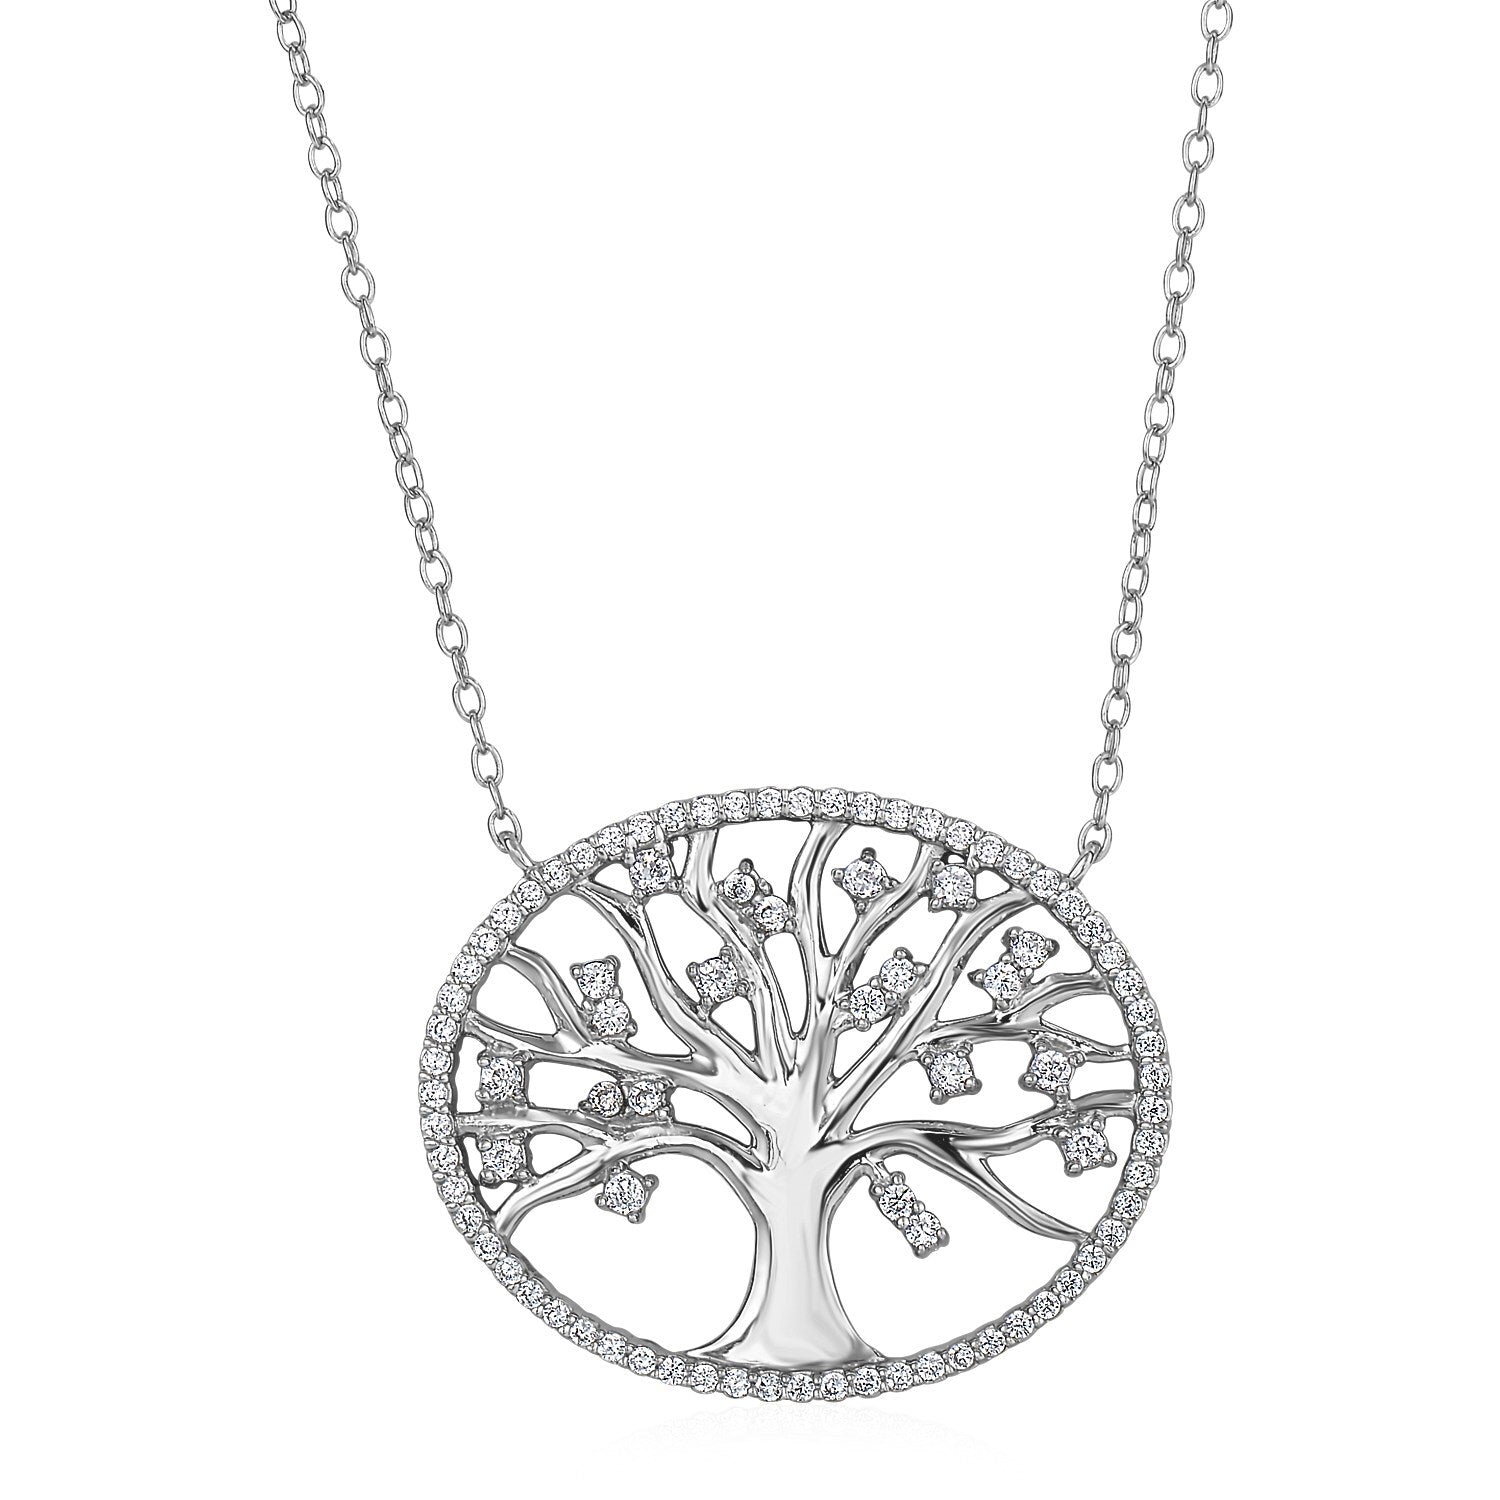 Tree of Life Necklace with Cubic Zirconia in Sterling Silver, size 18''